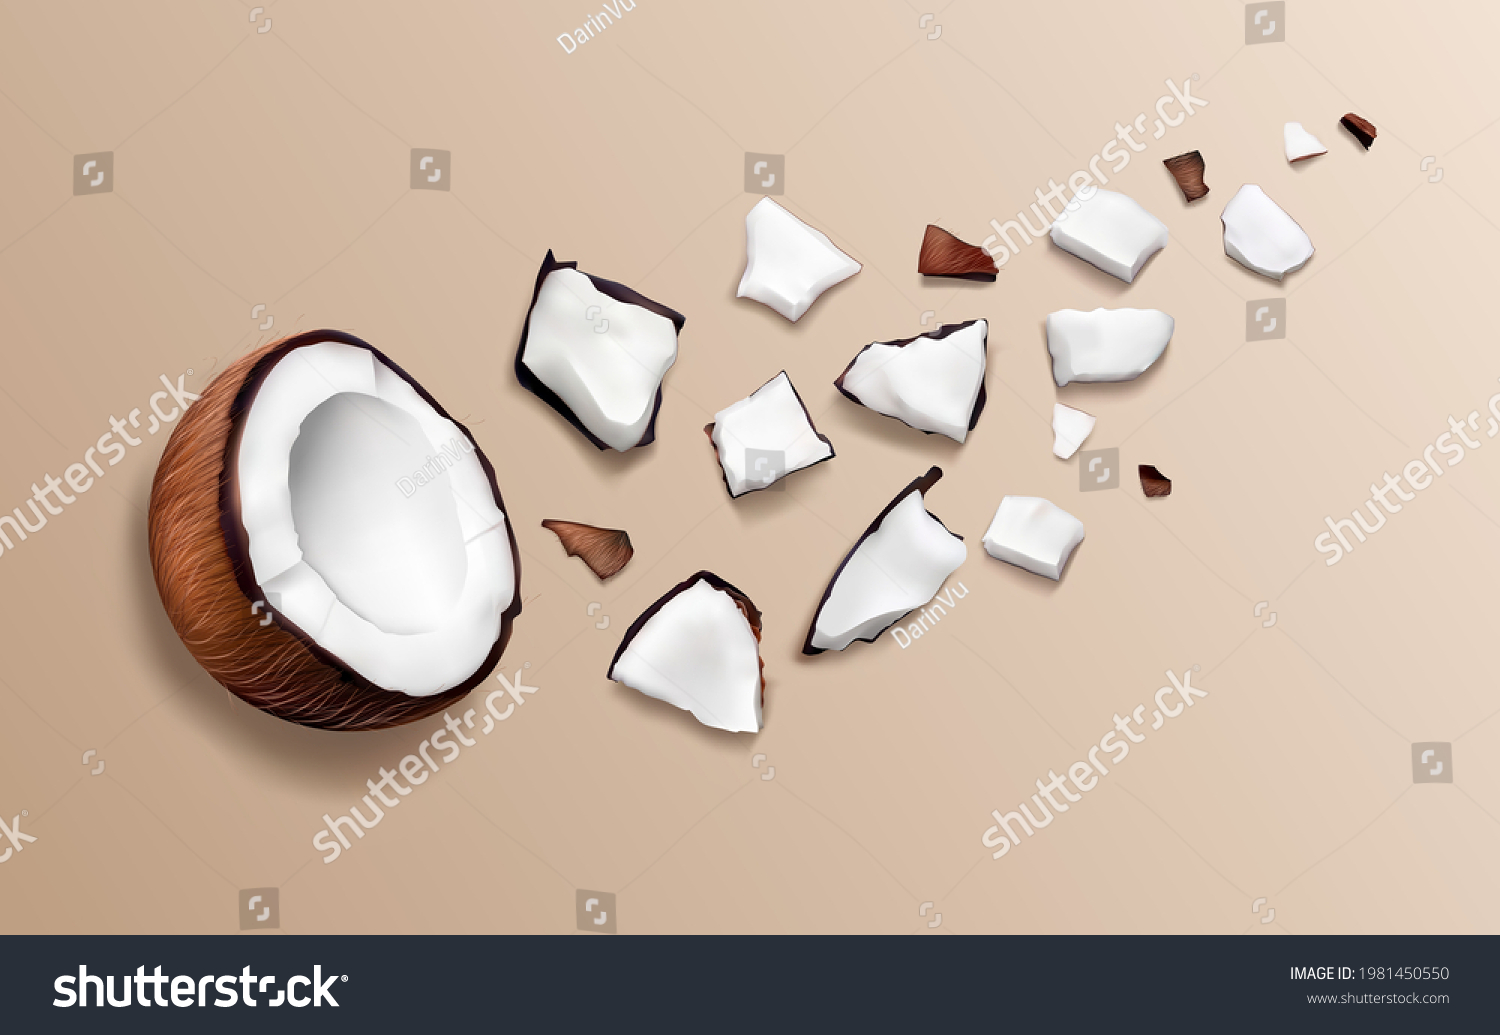 3d realistic cracked coconut vector illustration. Juicy parts, slices of coconut. Top view. Broken into pieces on the table. Cosmetic products. Tropical abc tract on biege background. Spaa, vegan, bio #1981450550